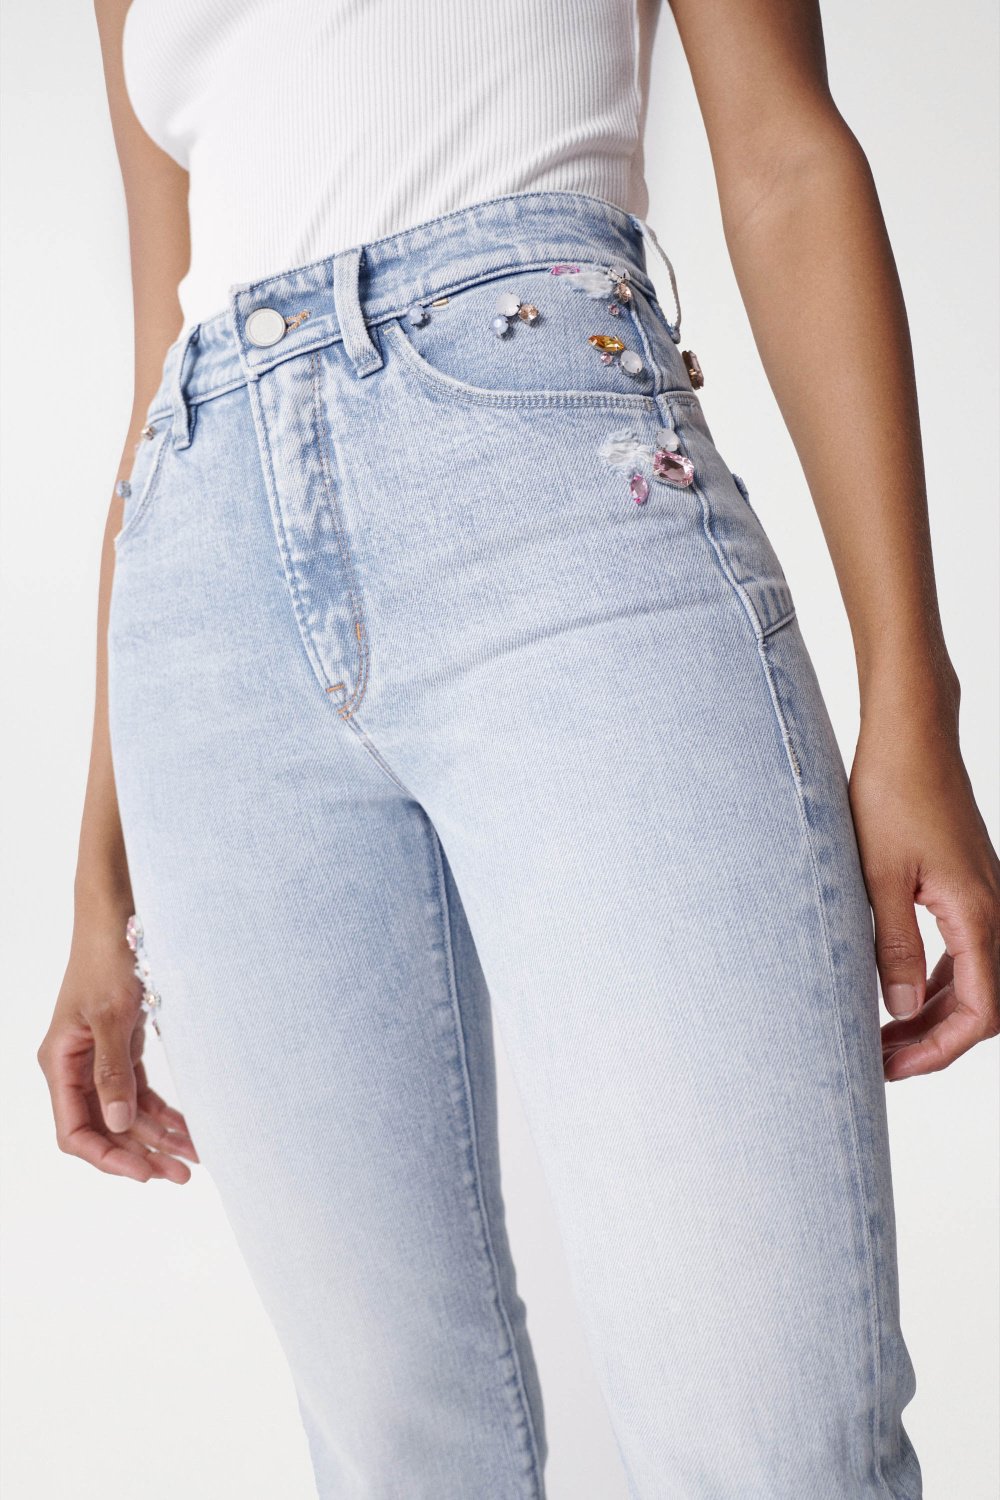 JEAN FAITH PUSH IN CROPPED SLIM DITION LIMITE - Salsa